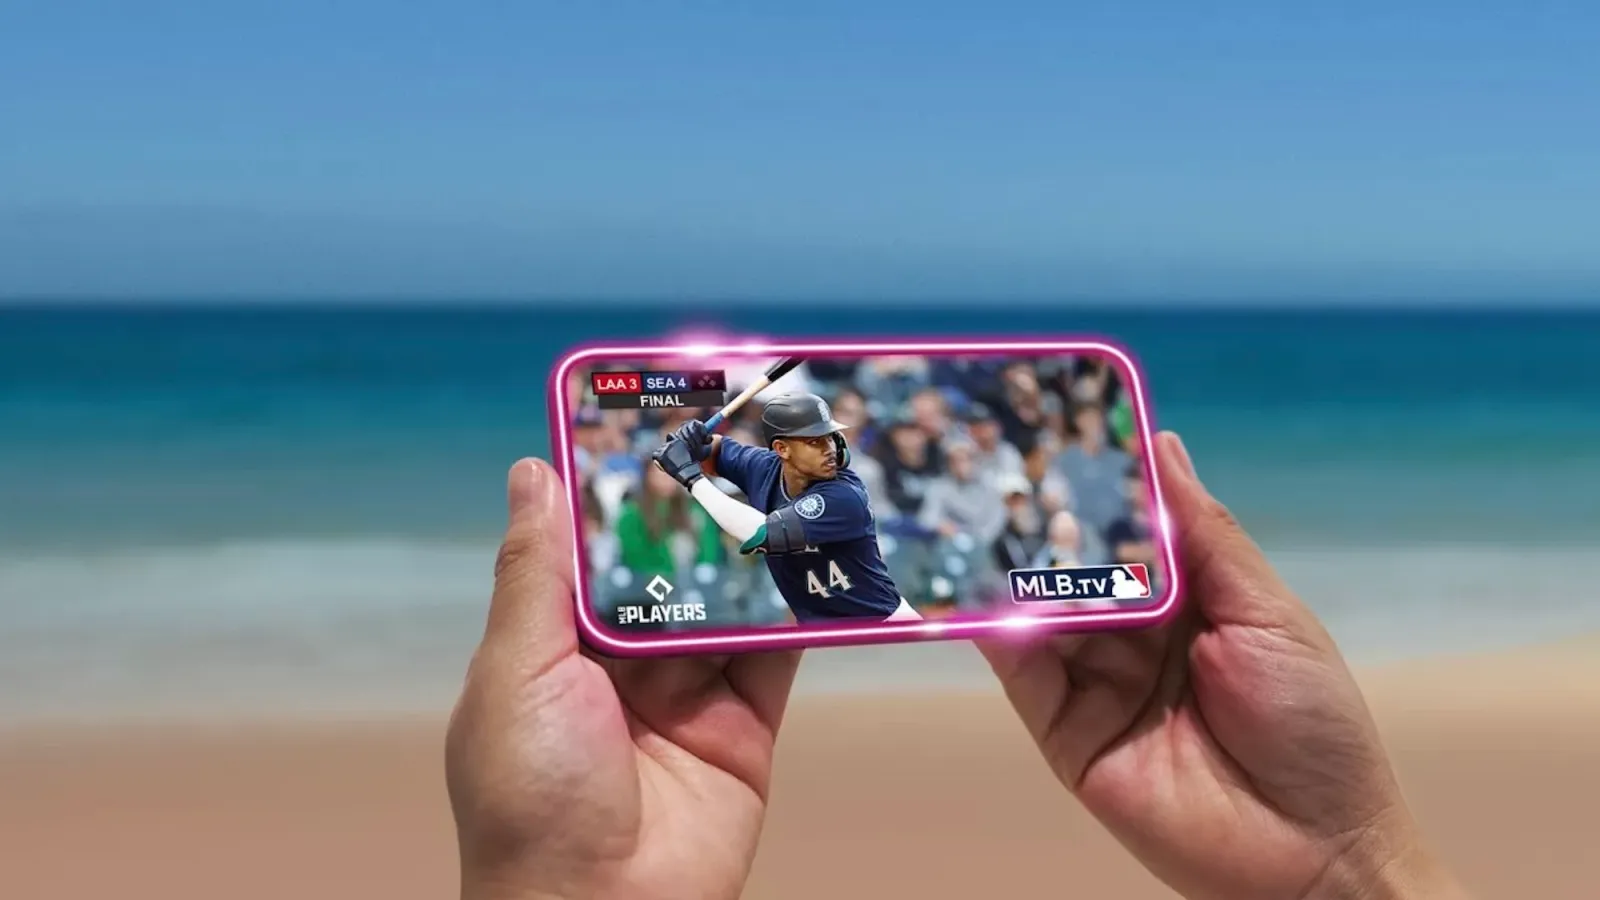 How T-Mobile Customers Can Get Free MLB.TV Access for All the Baseball Action?